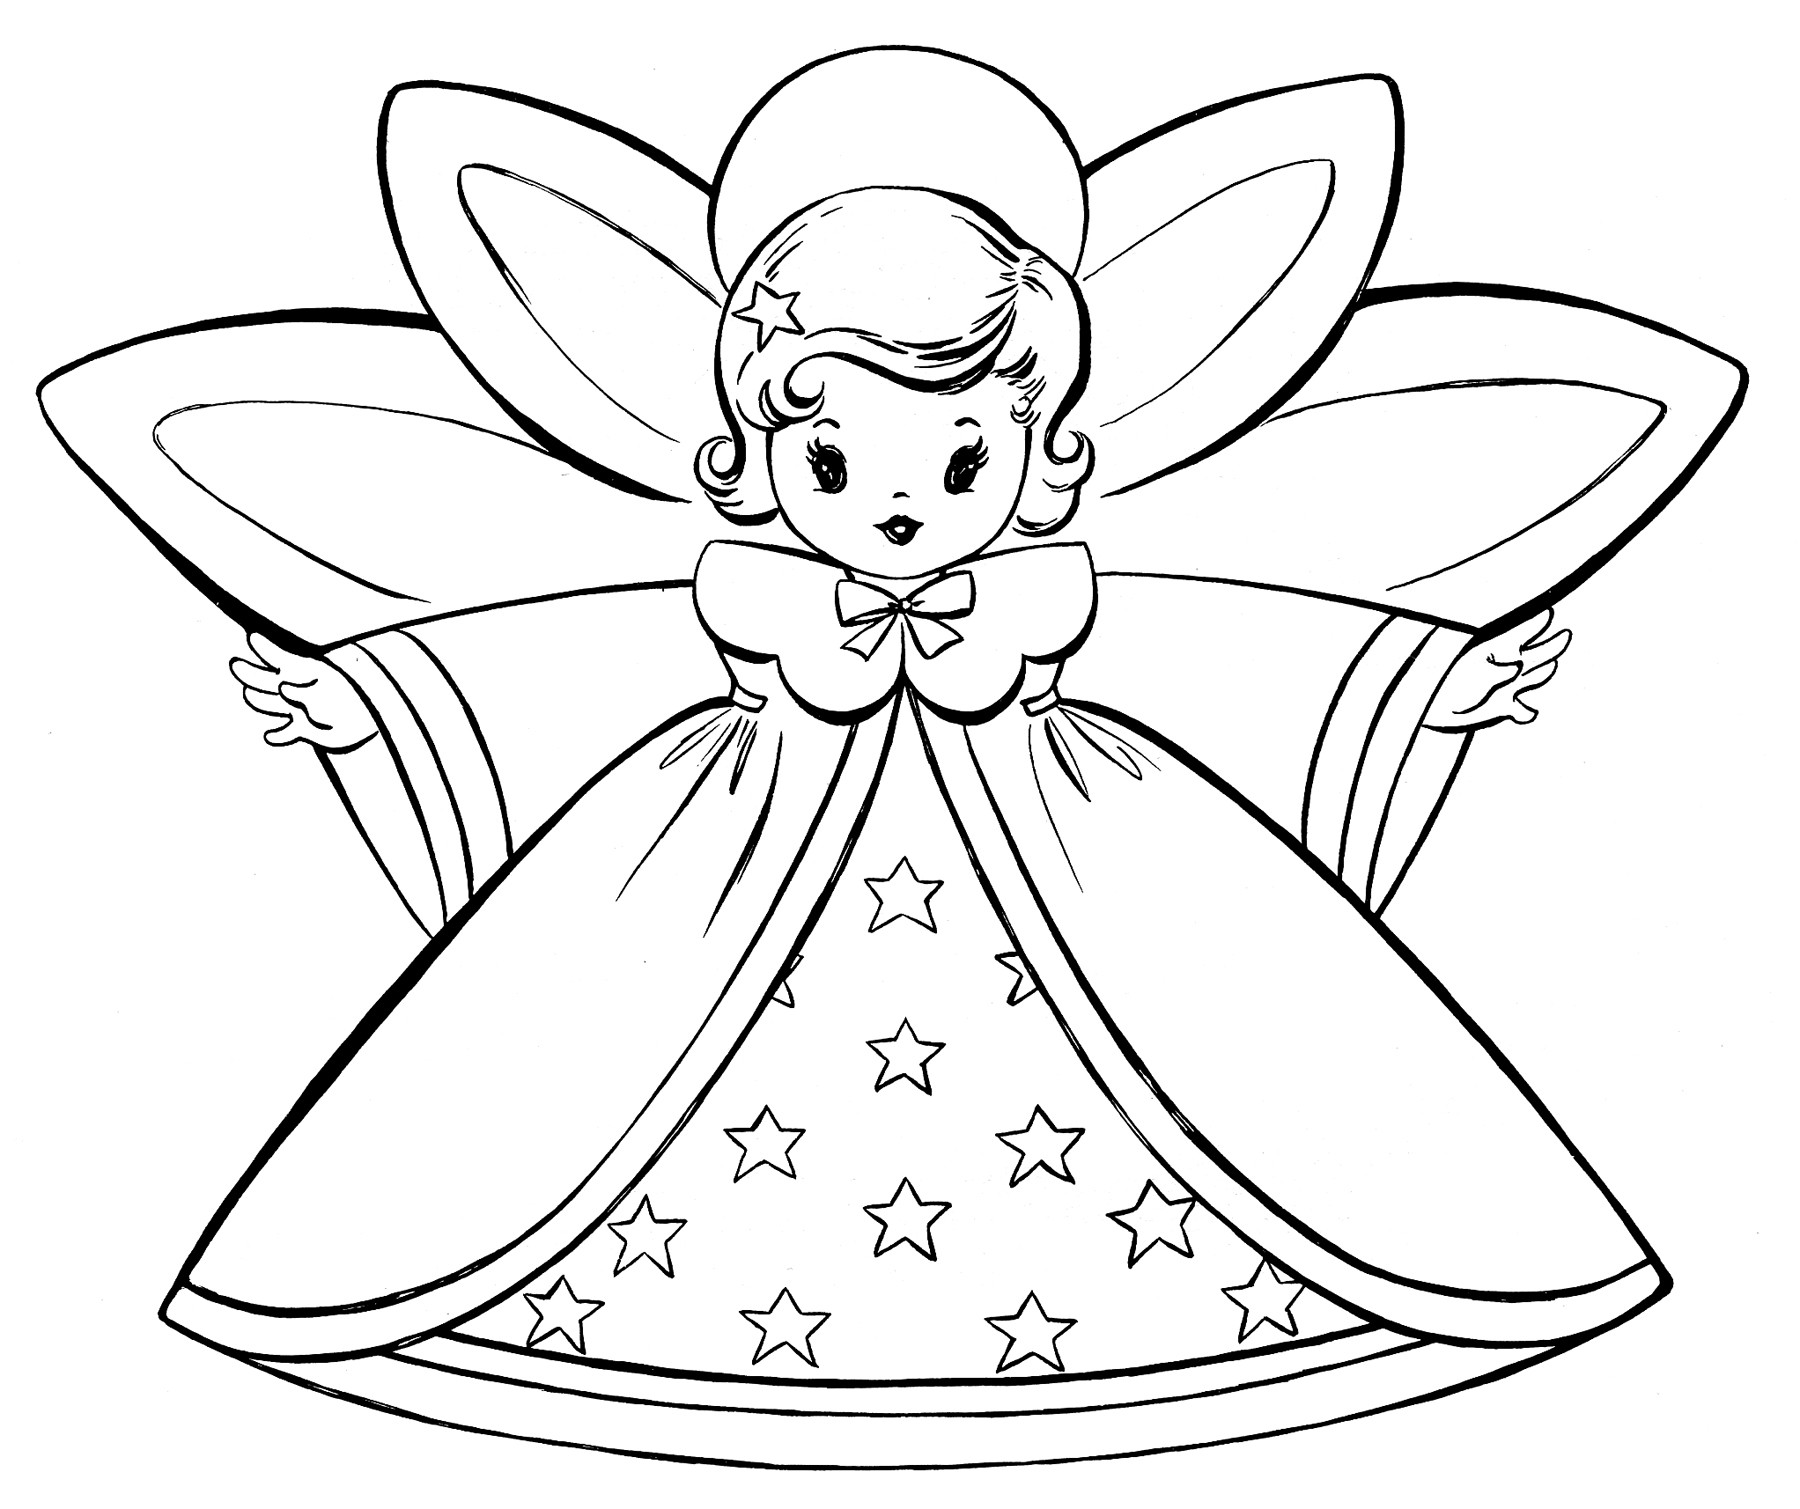 Christmas Coloring Book Pages
 Free Christmas Coloring Pages Retro Angels The